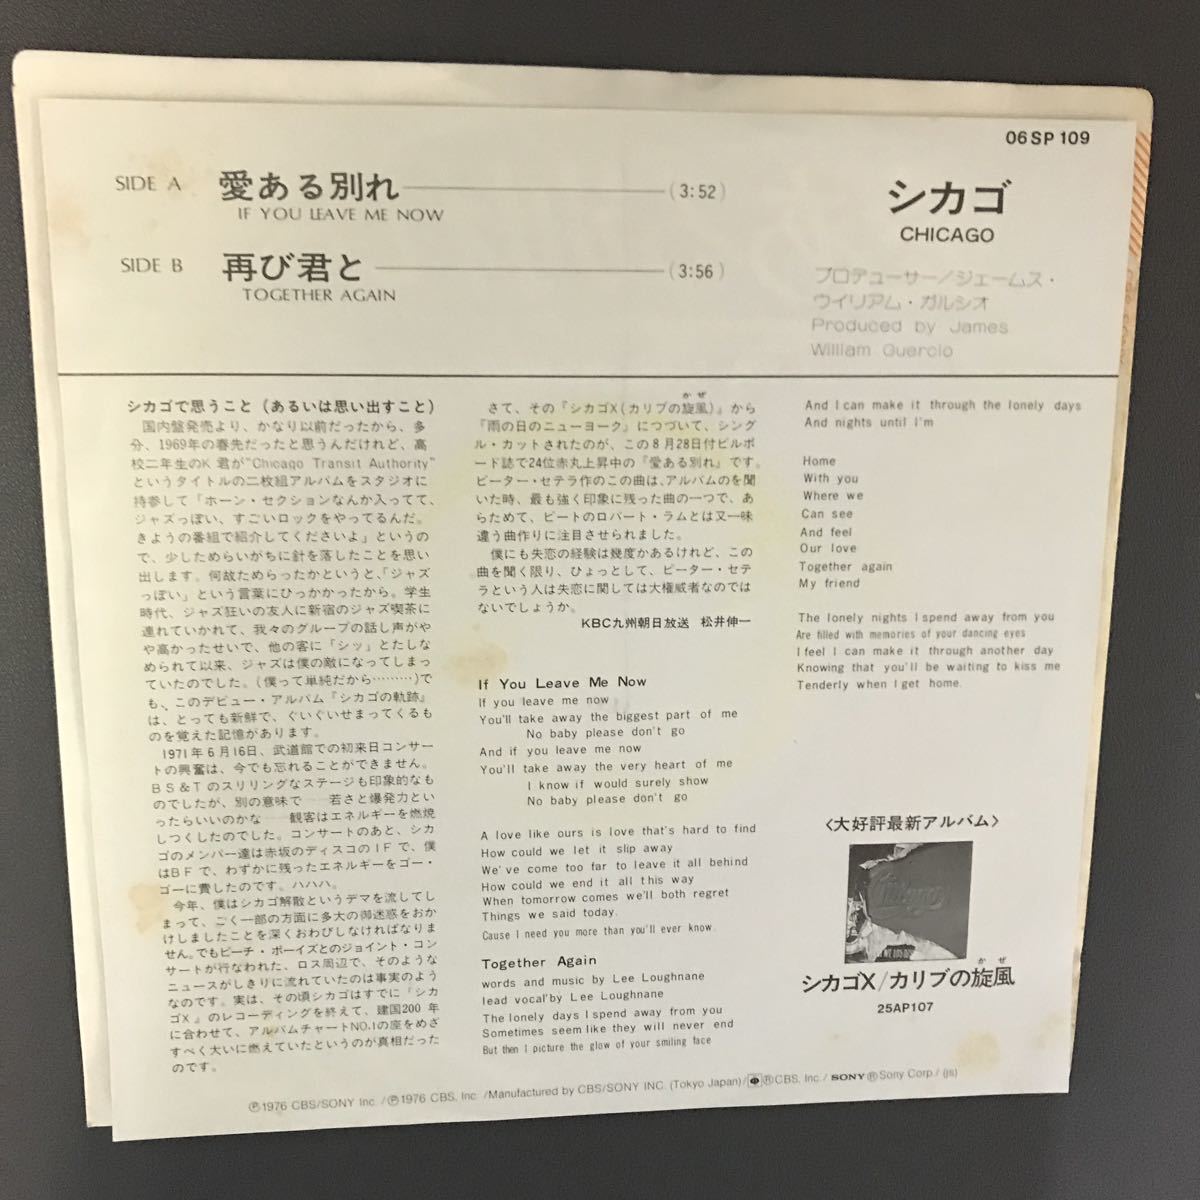 EP-010 Chicago If You Leave Me Now シカゴ 愛ある別れ 再び君と 日本盤_画像2